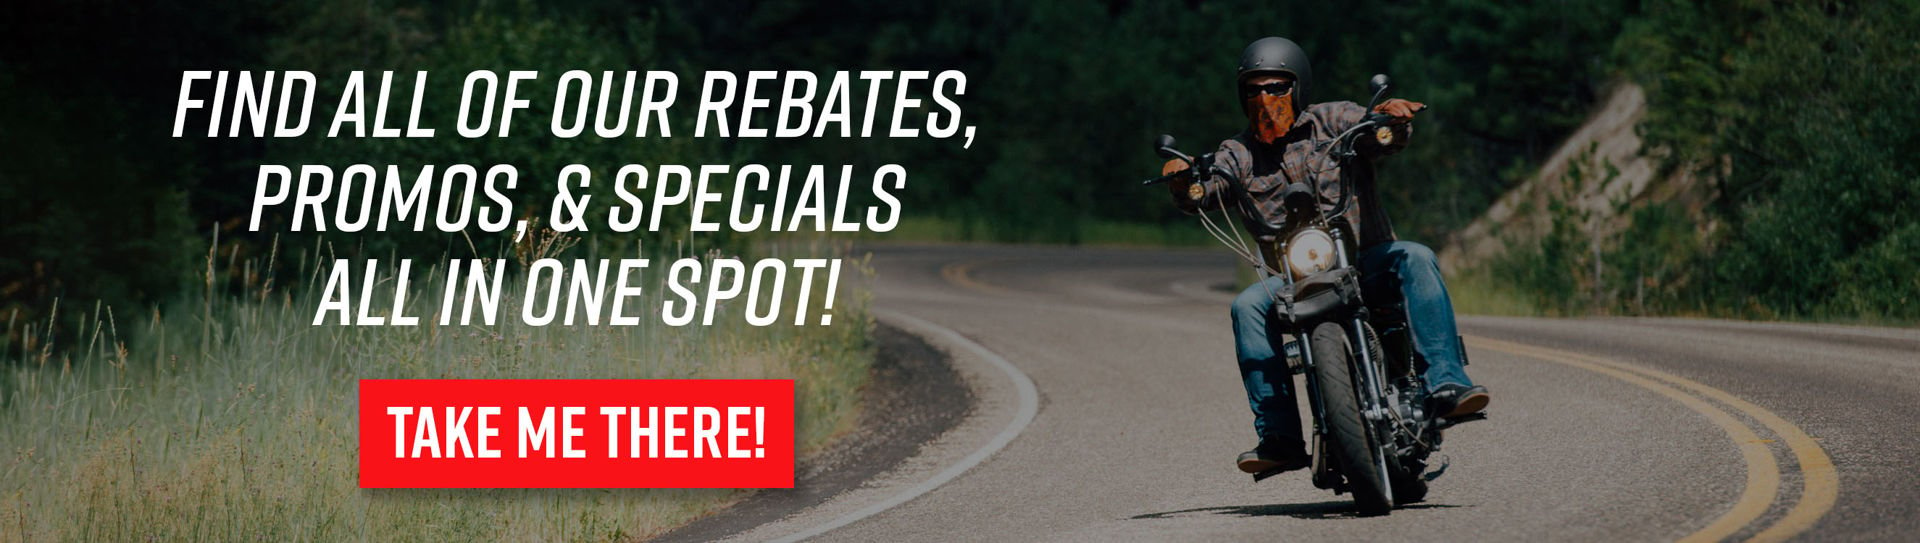 Find all of our rebates, promos, & specials all in one spot! Take me there!